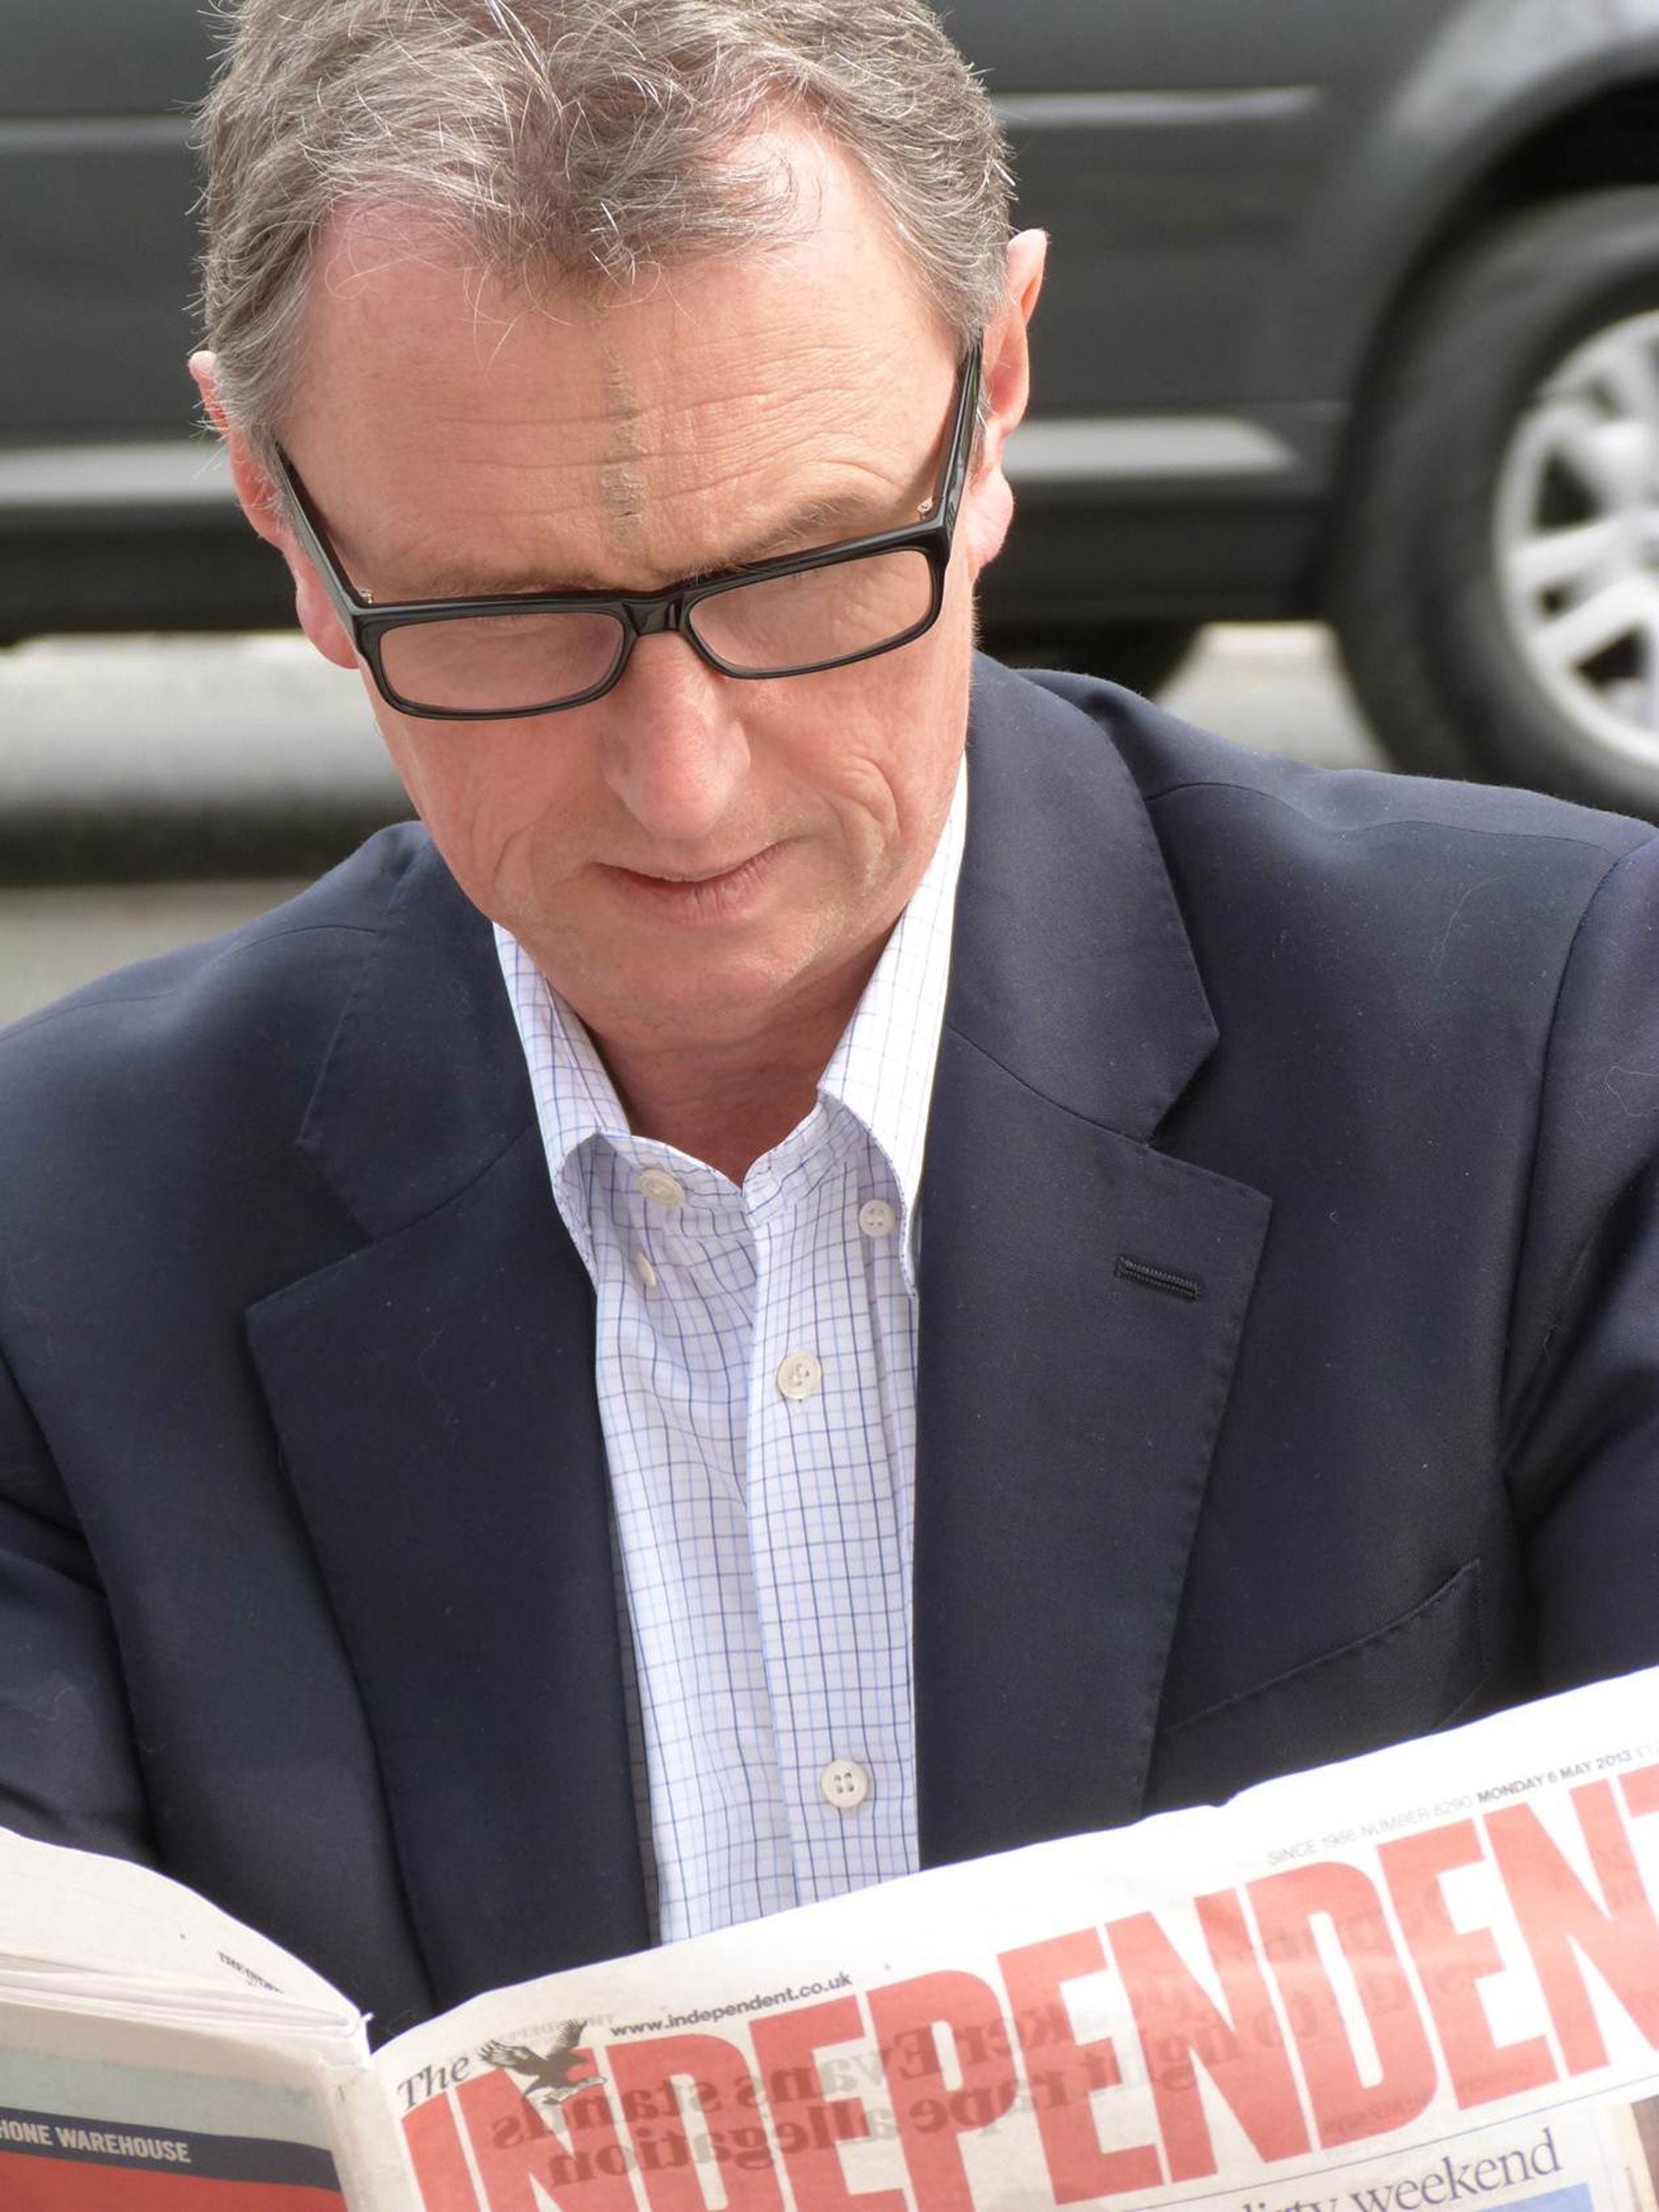 Nigel Evans, pictured yesterday with the bruise on his head, reading a copy of The Independent